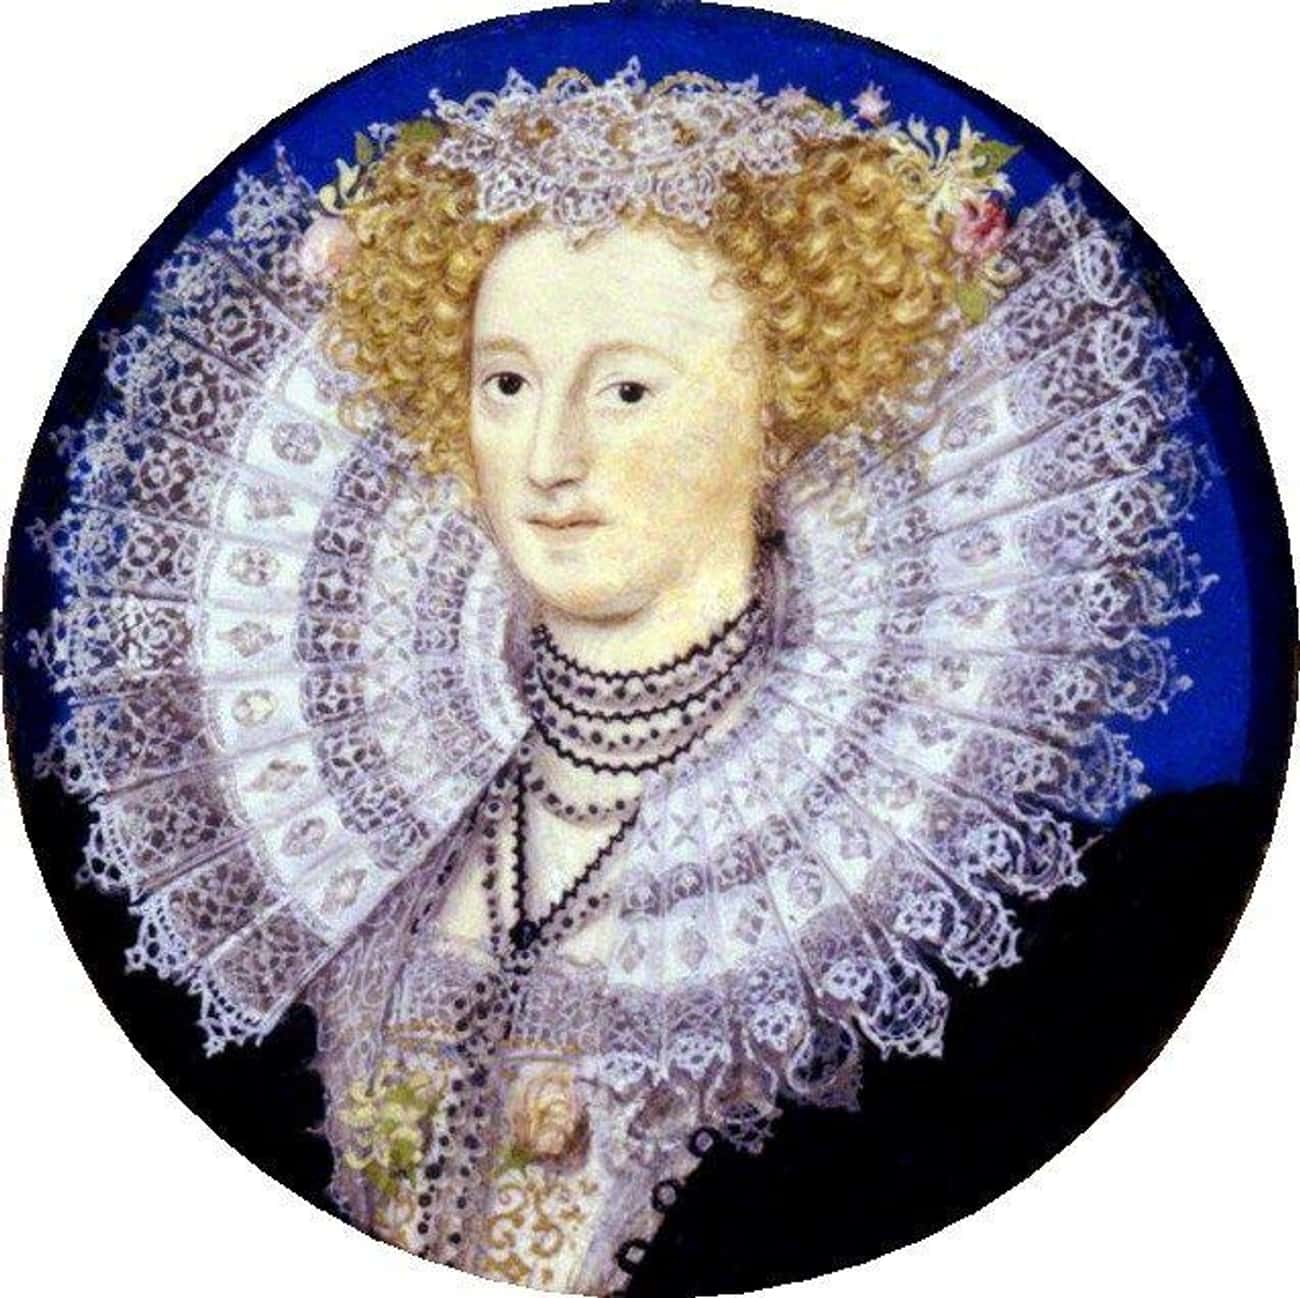 The Invention Of Starch Led To More Elaborate Ruffs